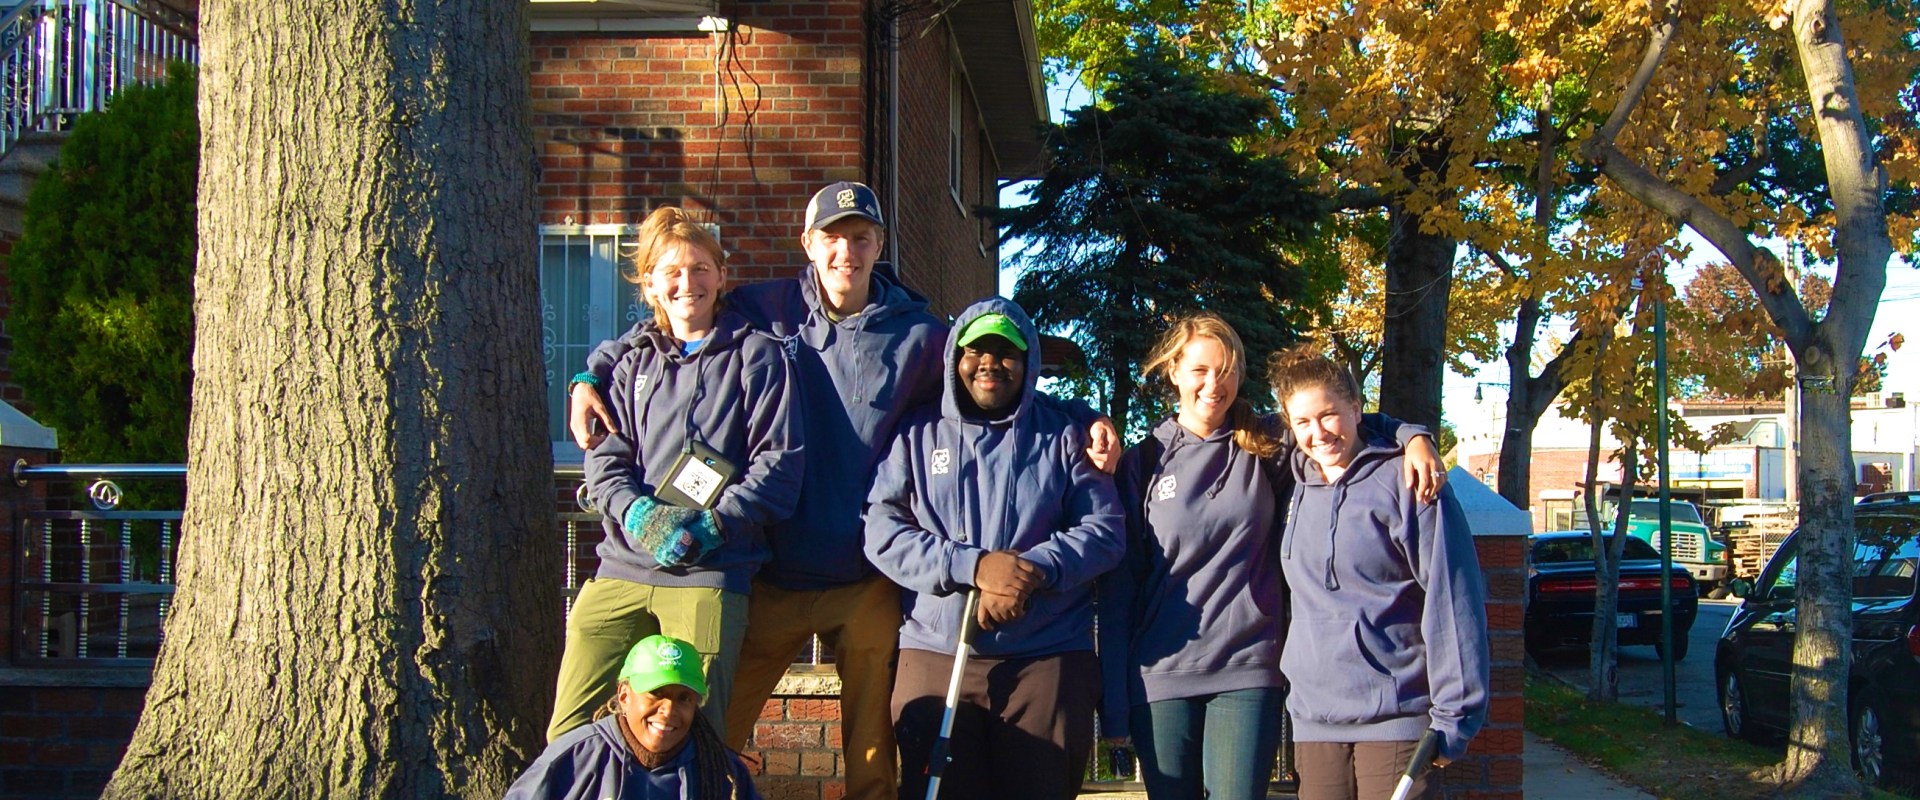 What is the nyc street tree program?